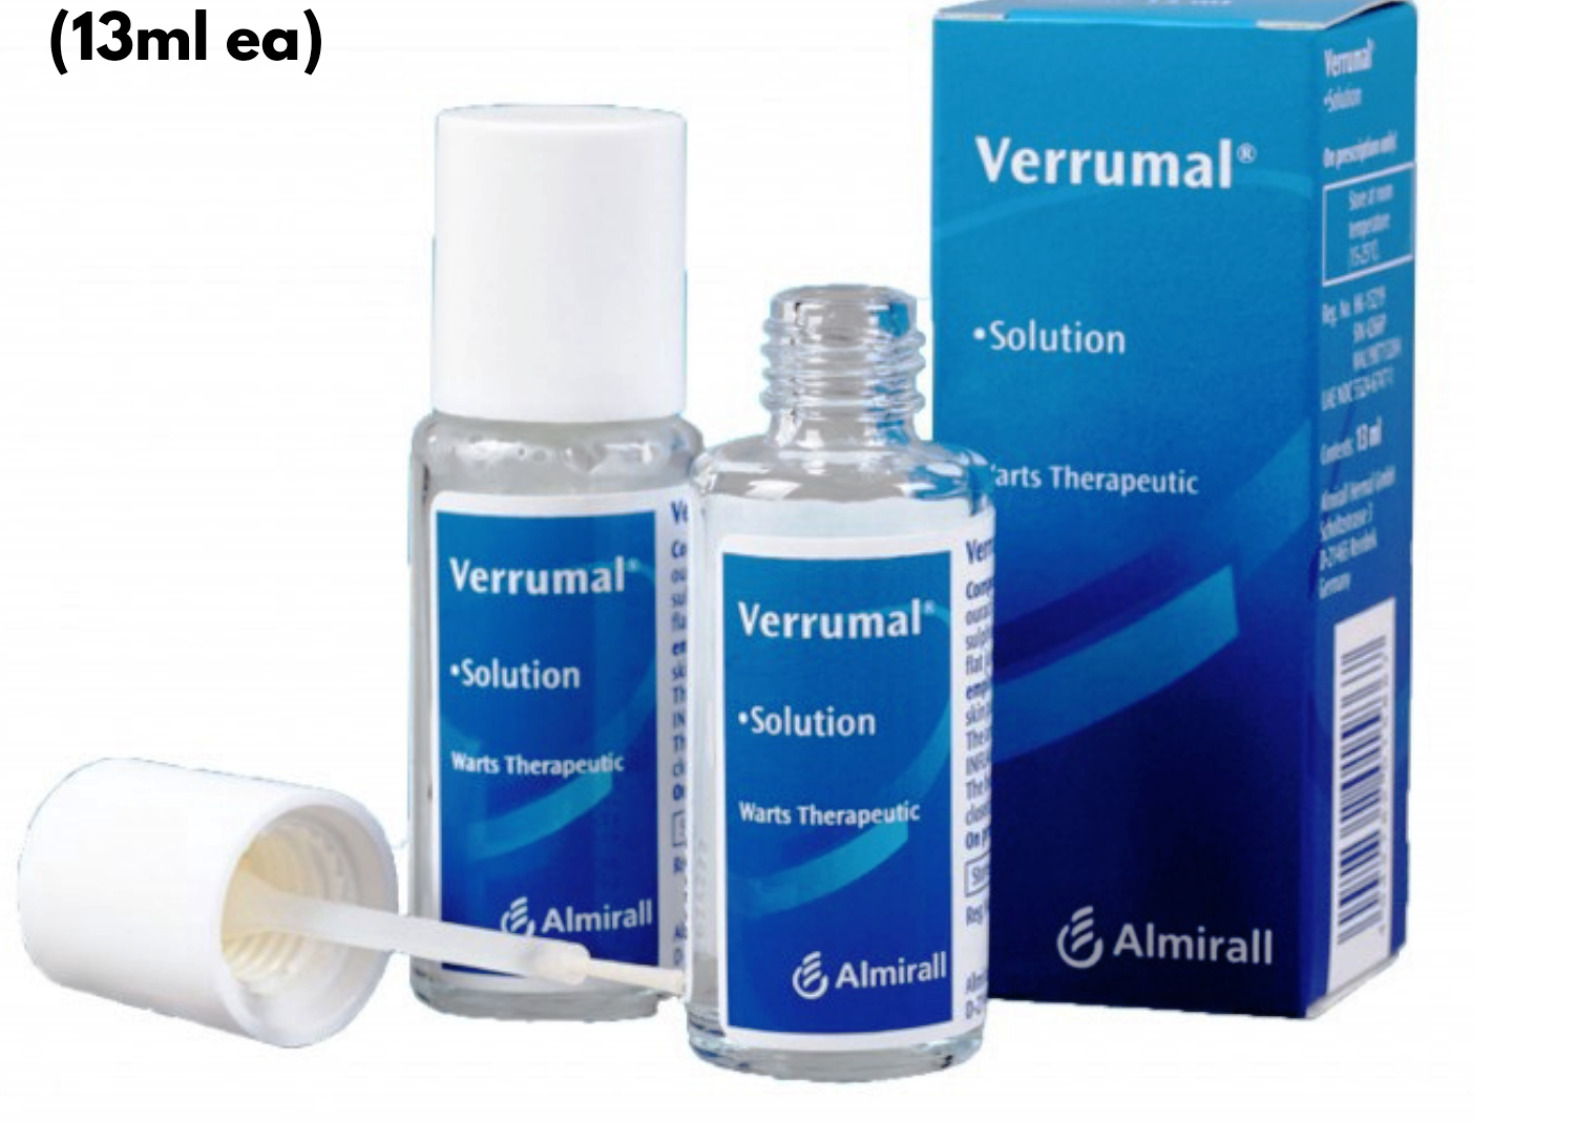 Almirall Verrumal Solution for Effective Removal of Warts and Treatment 13ml